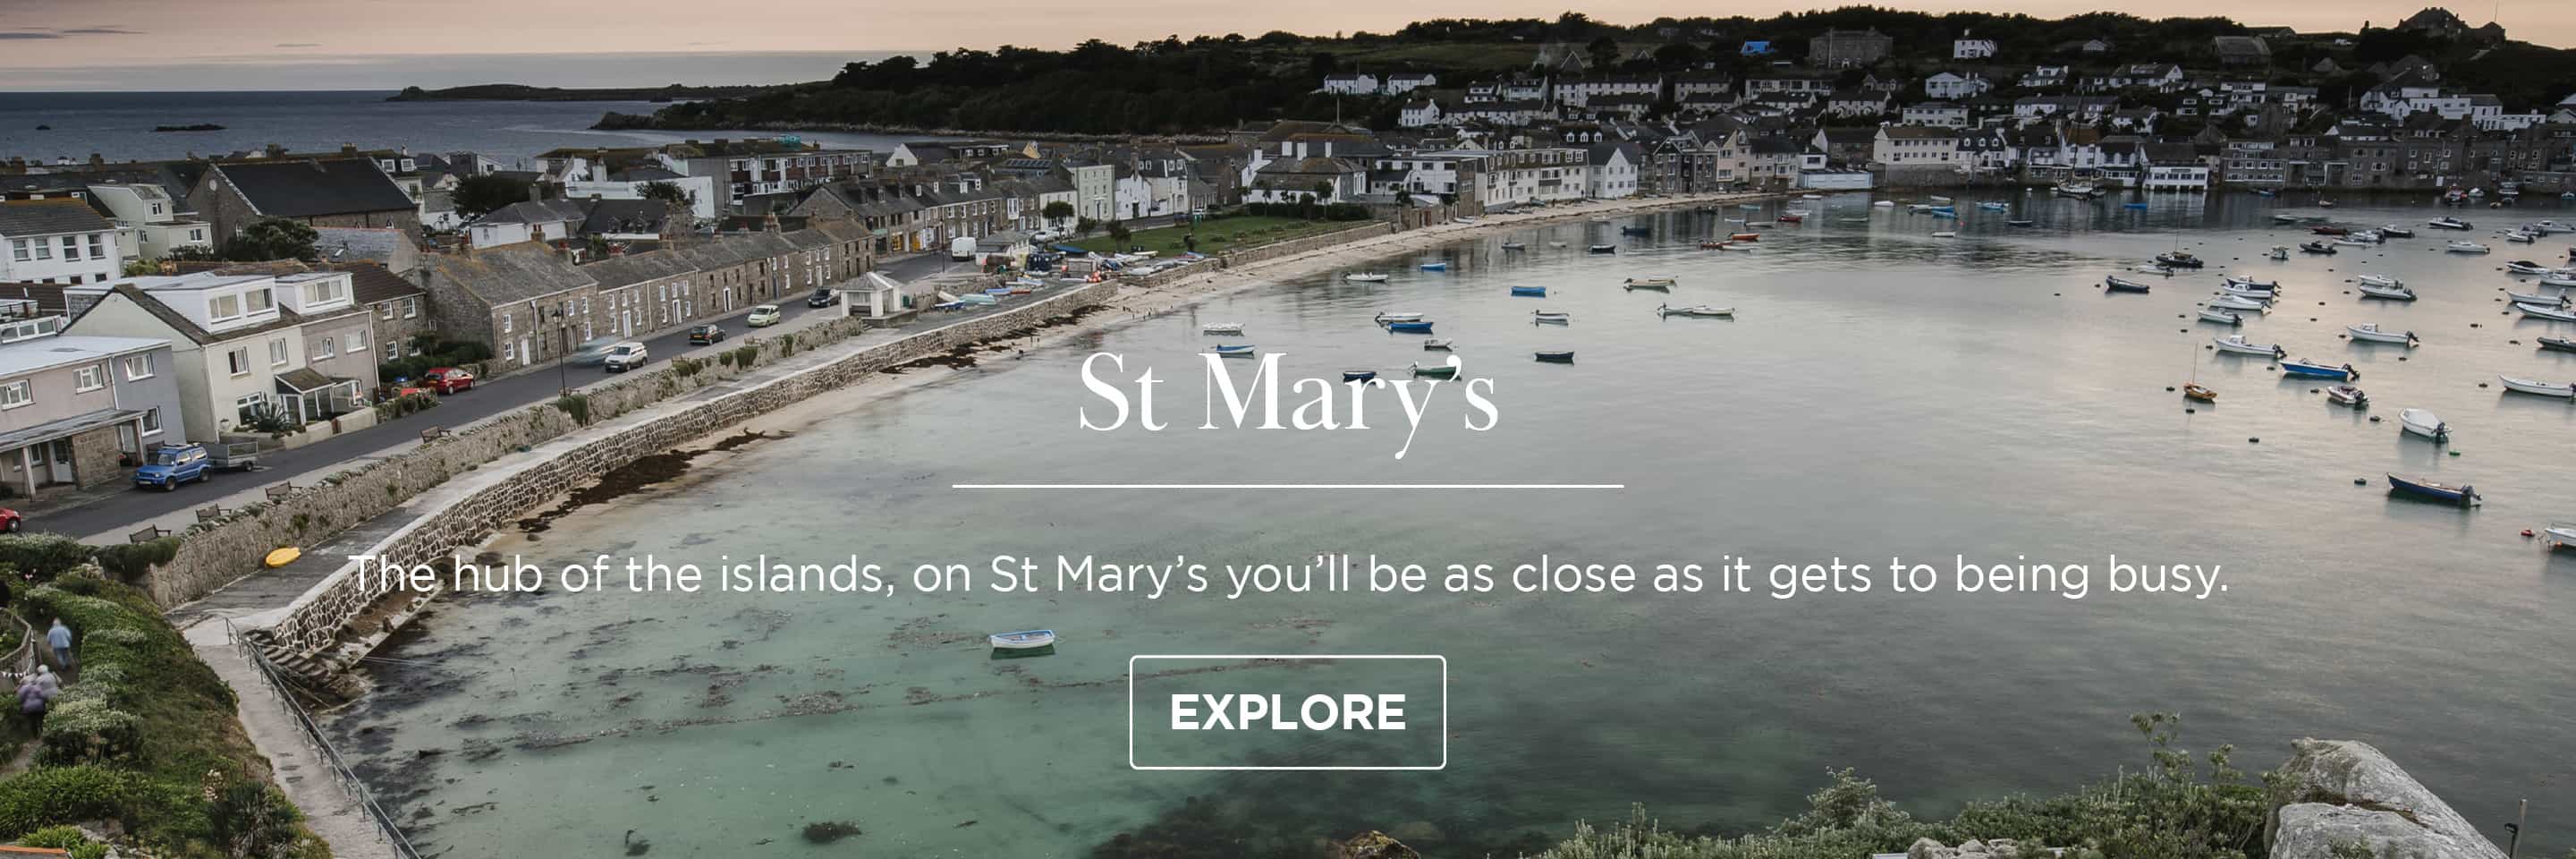 View of Hugh Town and St Mary's Harbour in autumn - St Mary's, Isles of Scilly